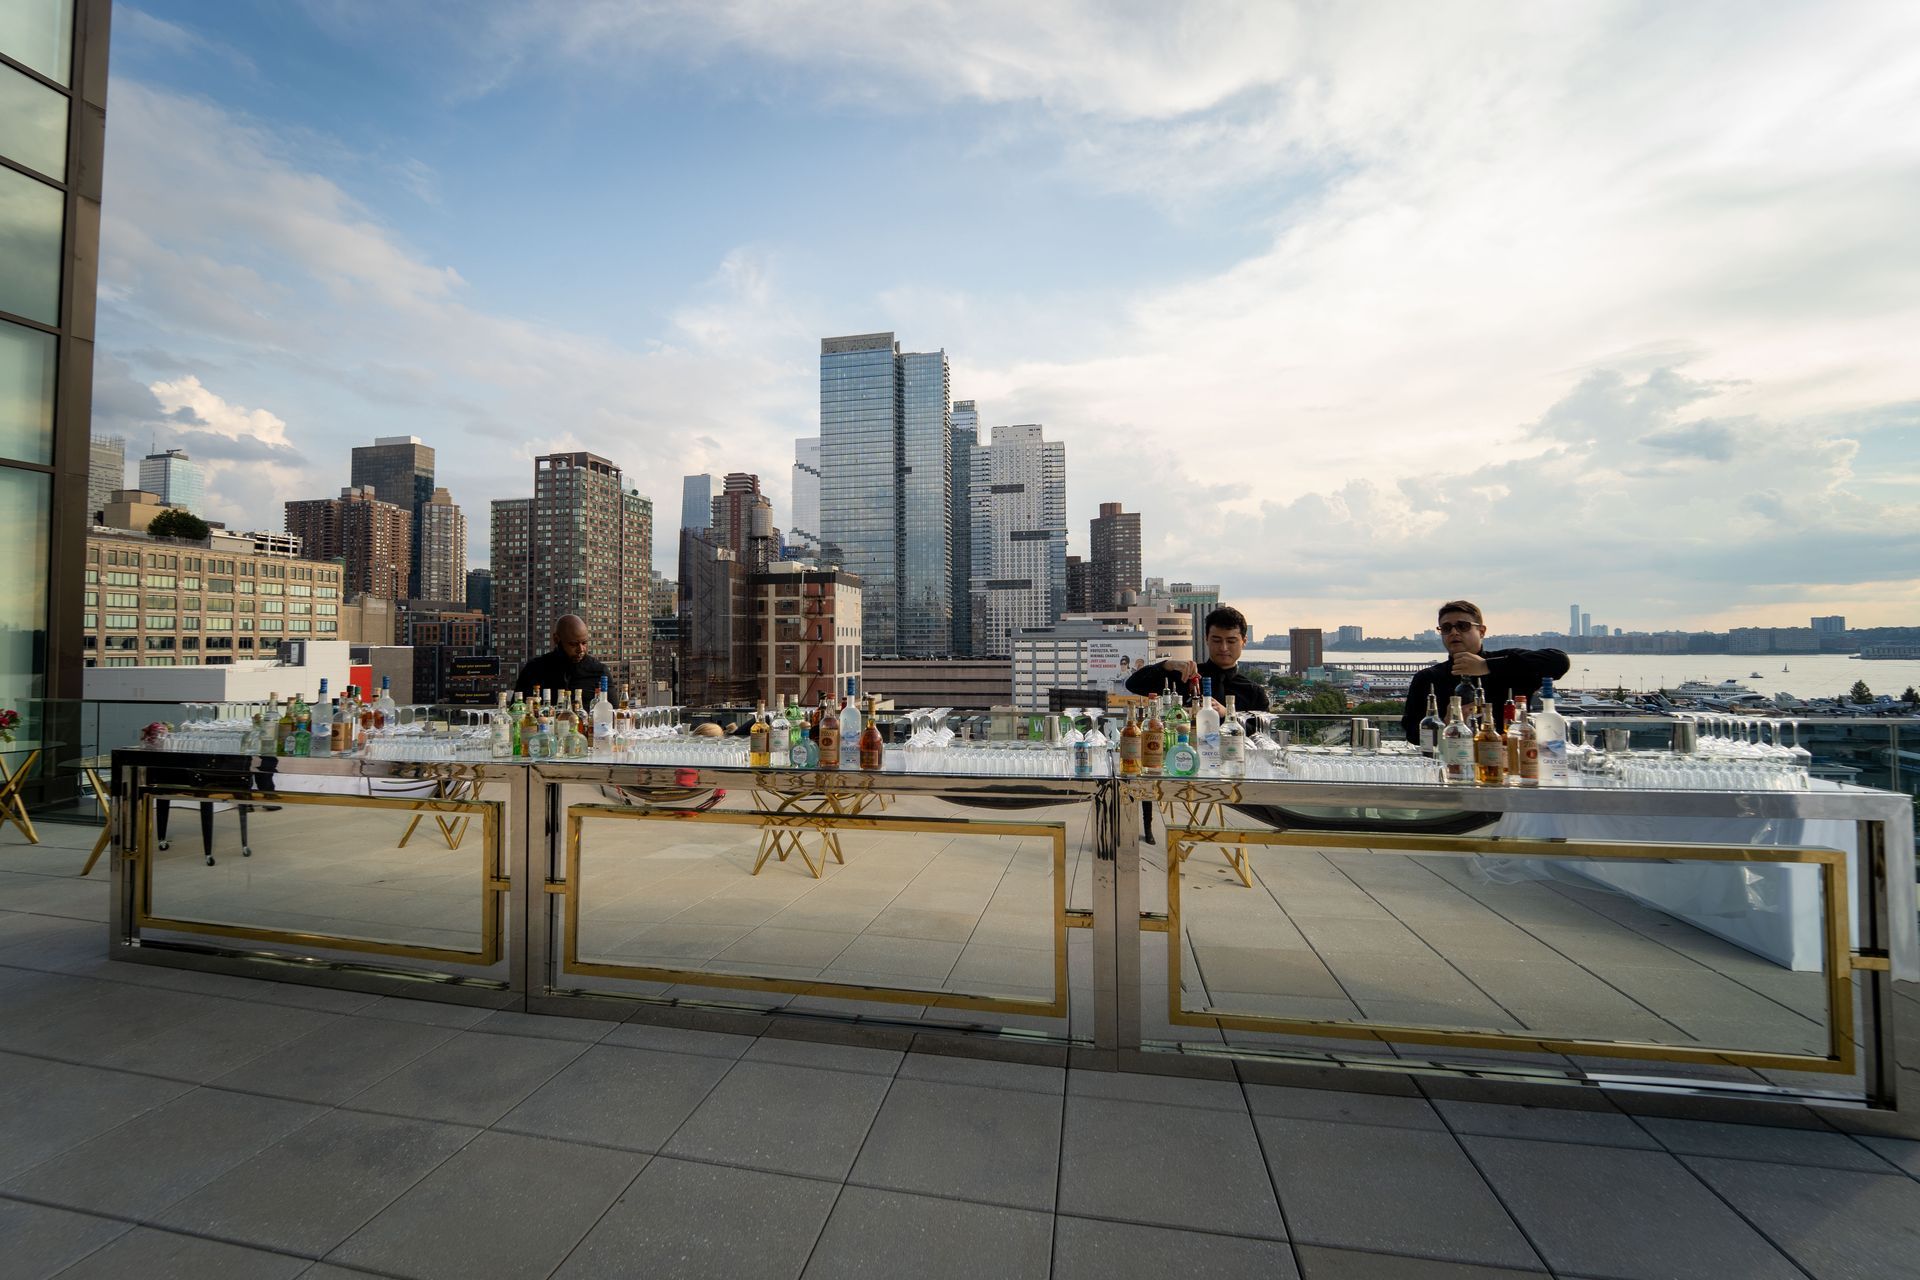 A group of people are sitting at a table with a city skyline in the background.